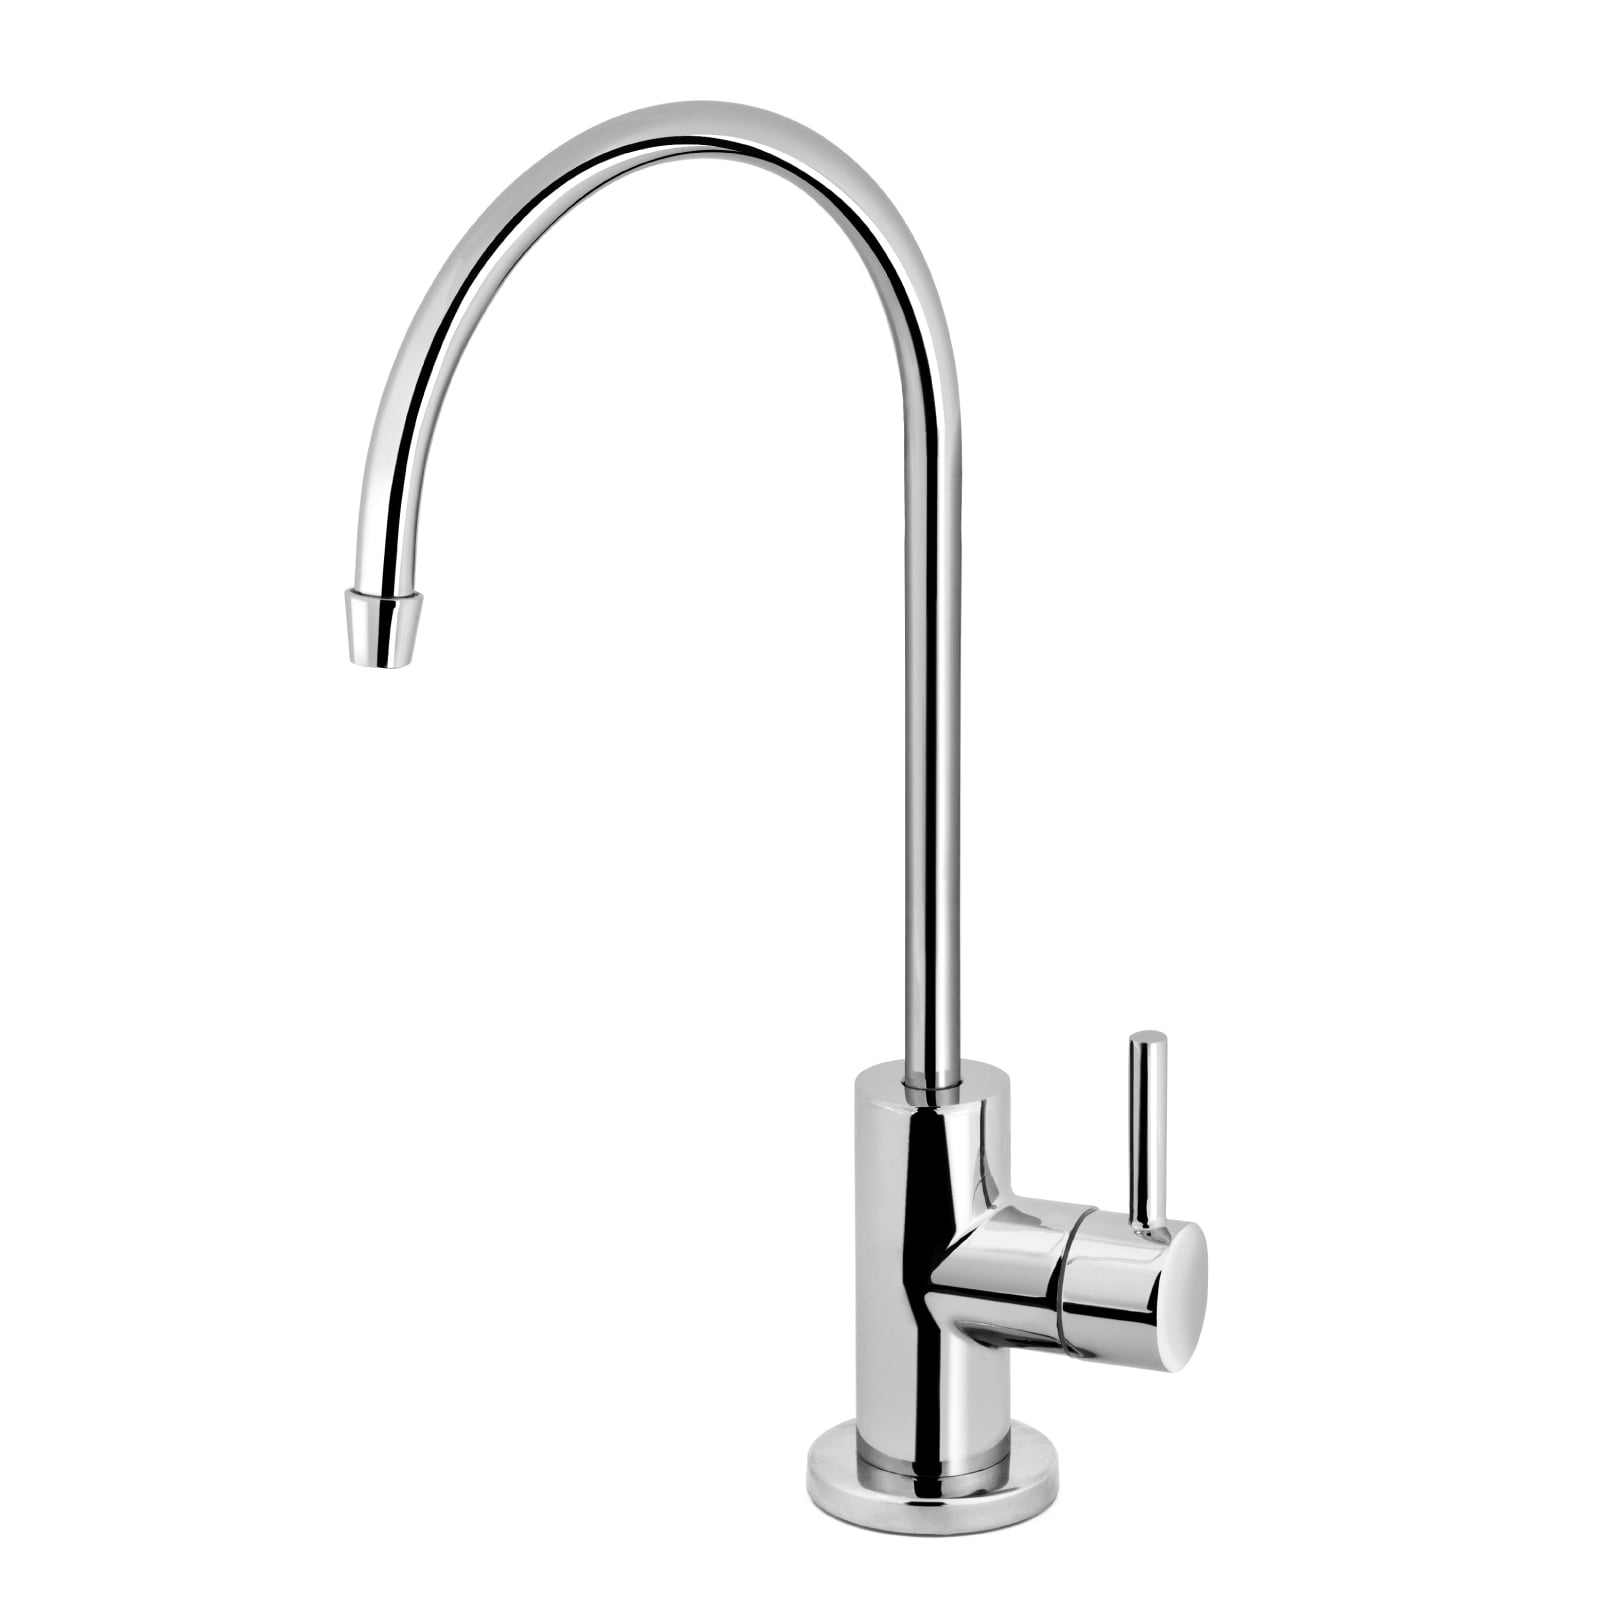 Lead Free Drink Water Filter Chrome Kitchen Sink Taps Pull Out Swivel Faucet 